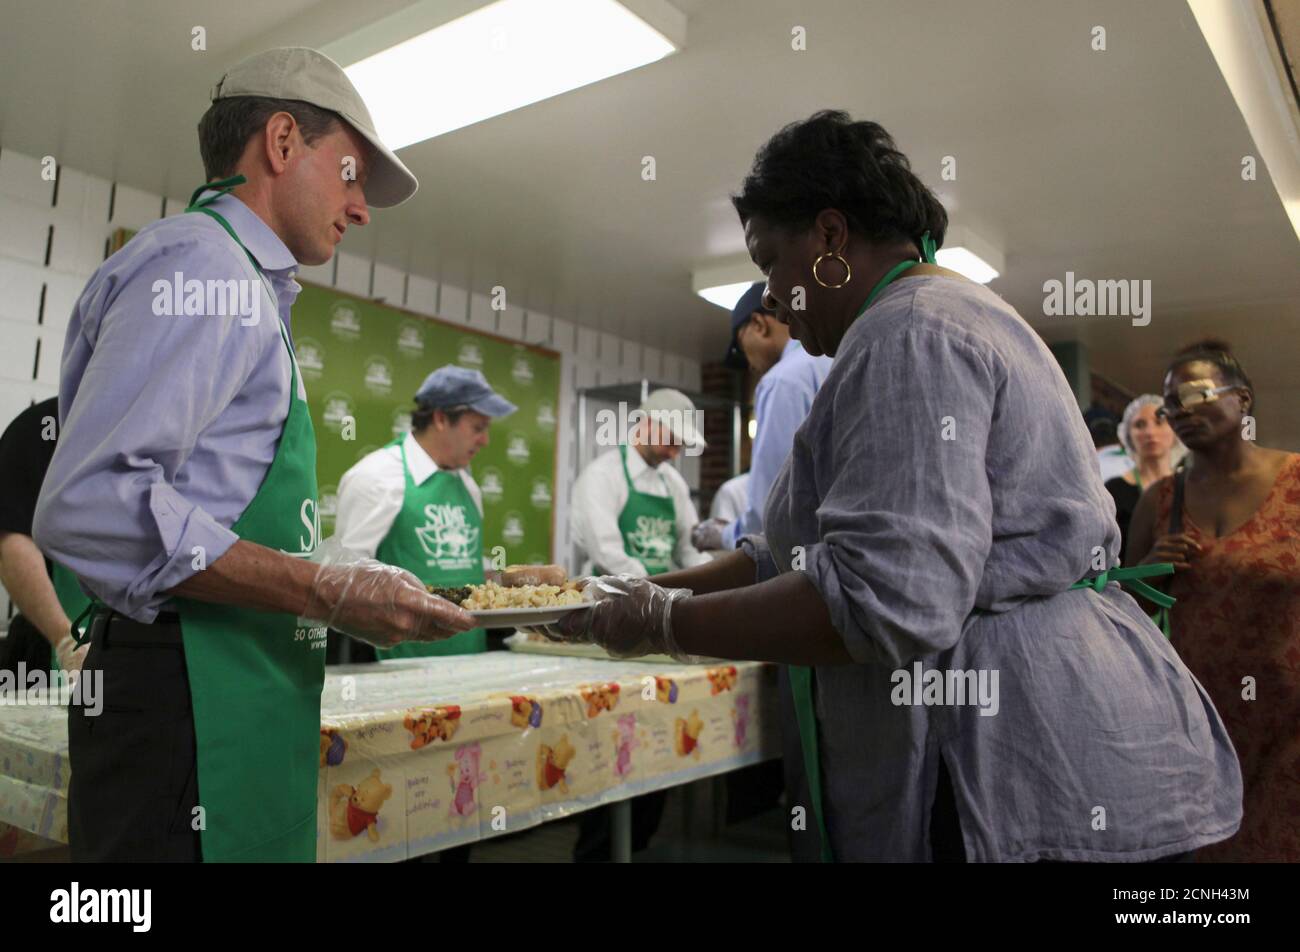 U.S. Treasury Secretary Timothy Geithner serves lunch to the homeless and other clients at the 'So Others May Eat'  (SOME) soup kitchen and social service center for the poor in downtown Washington, June 25, 2009.    REUTERS/Jim Bourg  (UNITED STATES POLITICS) Stock Photo